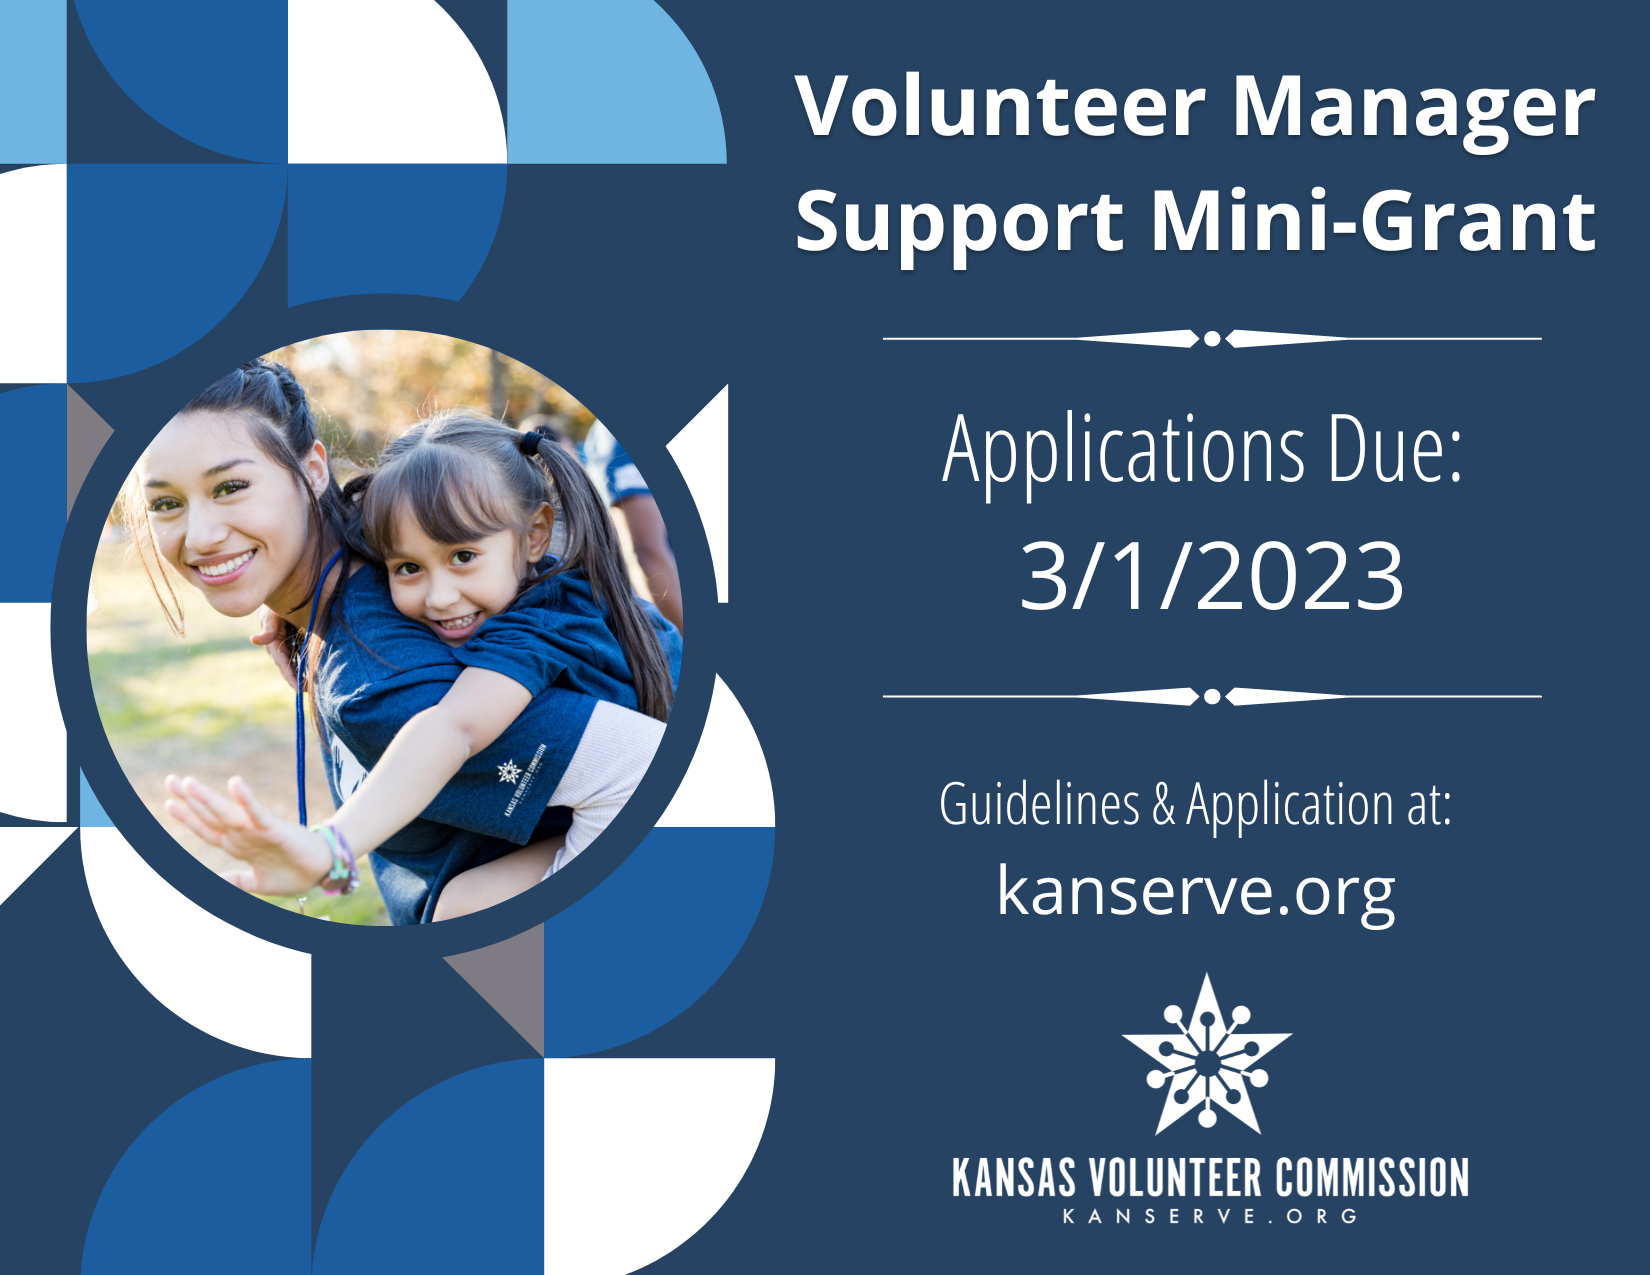 Volunteer Manager Support Mini Grant Applications Due 3/01/2023